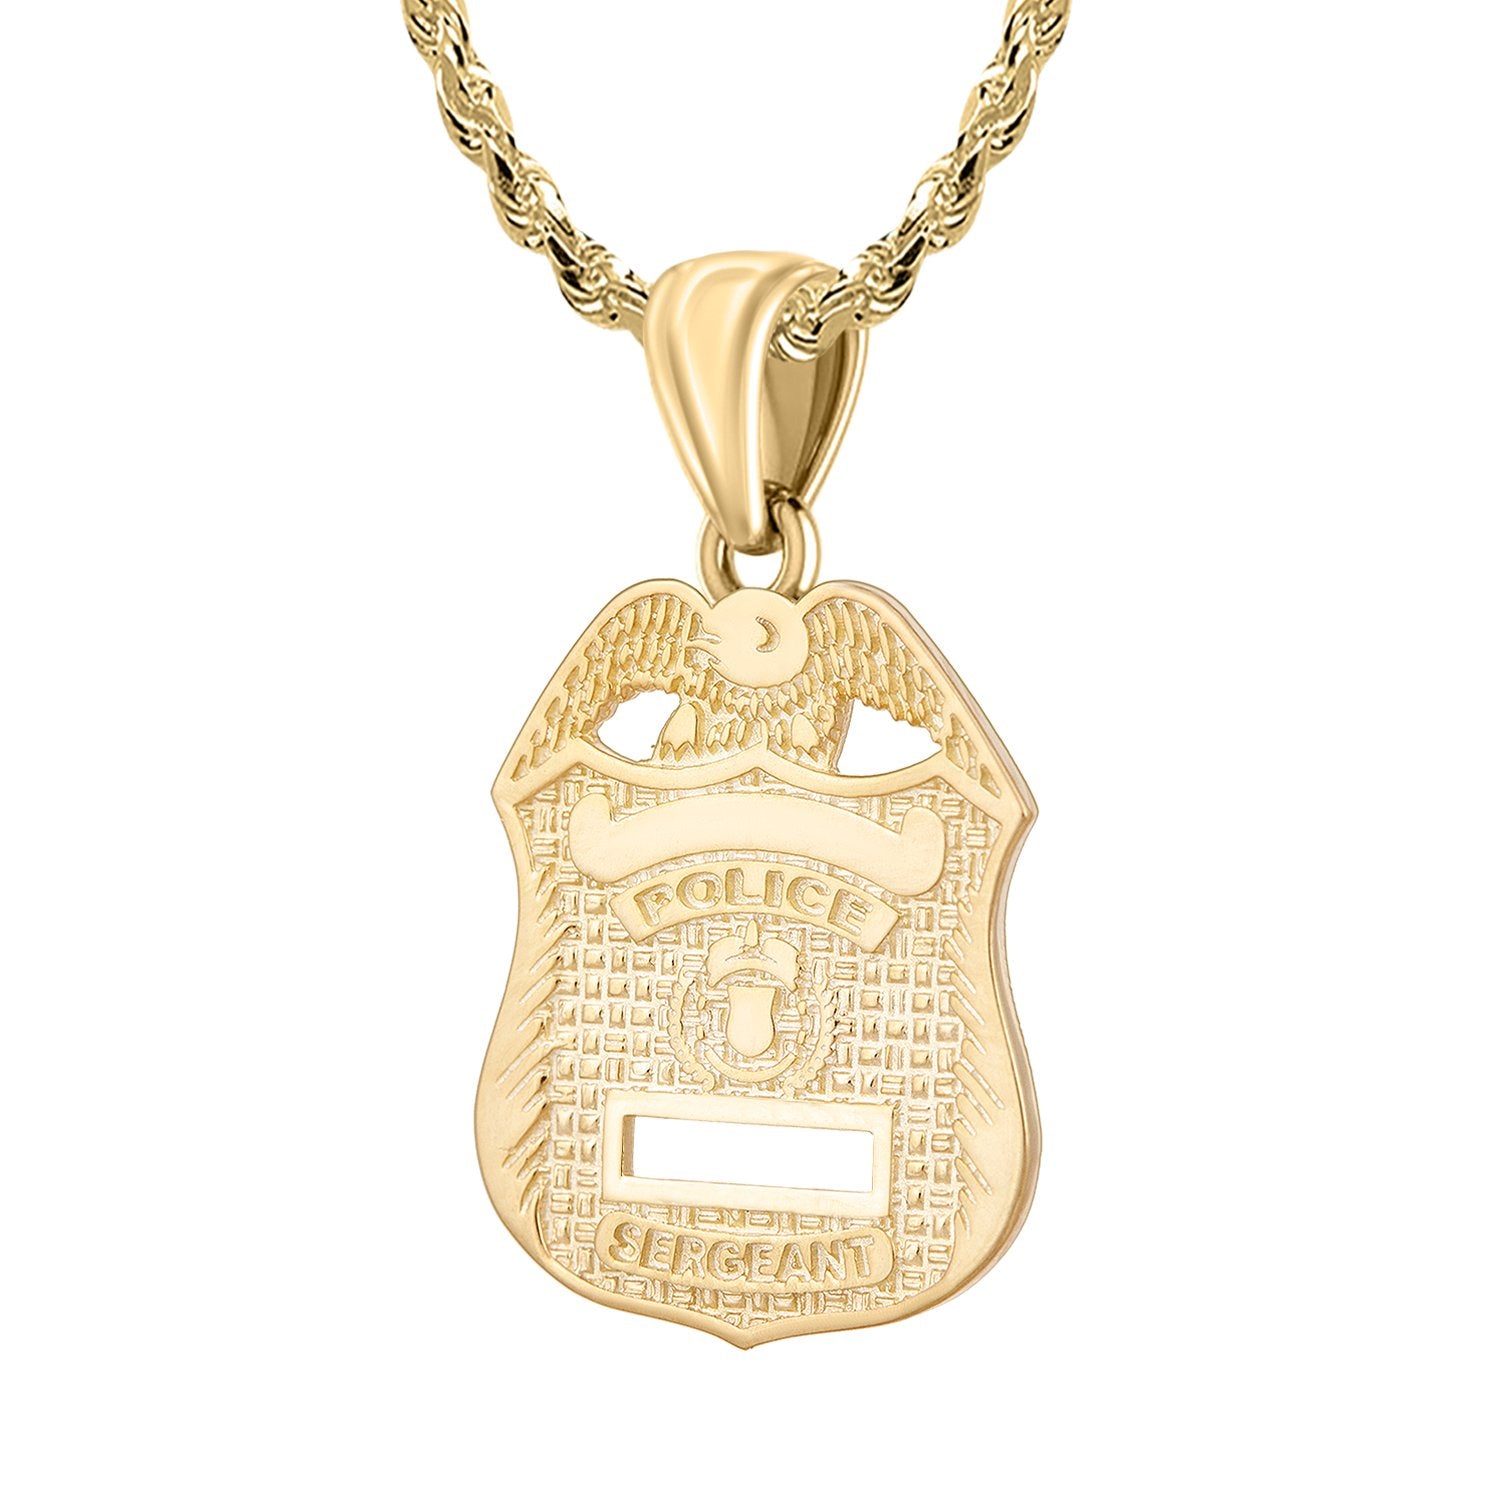 Police Badge Necklace In Gold For Men - 2.5mm Rope Chain